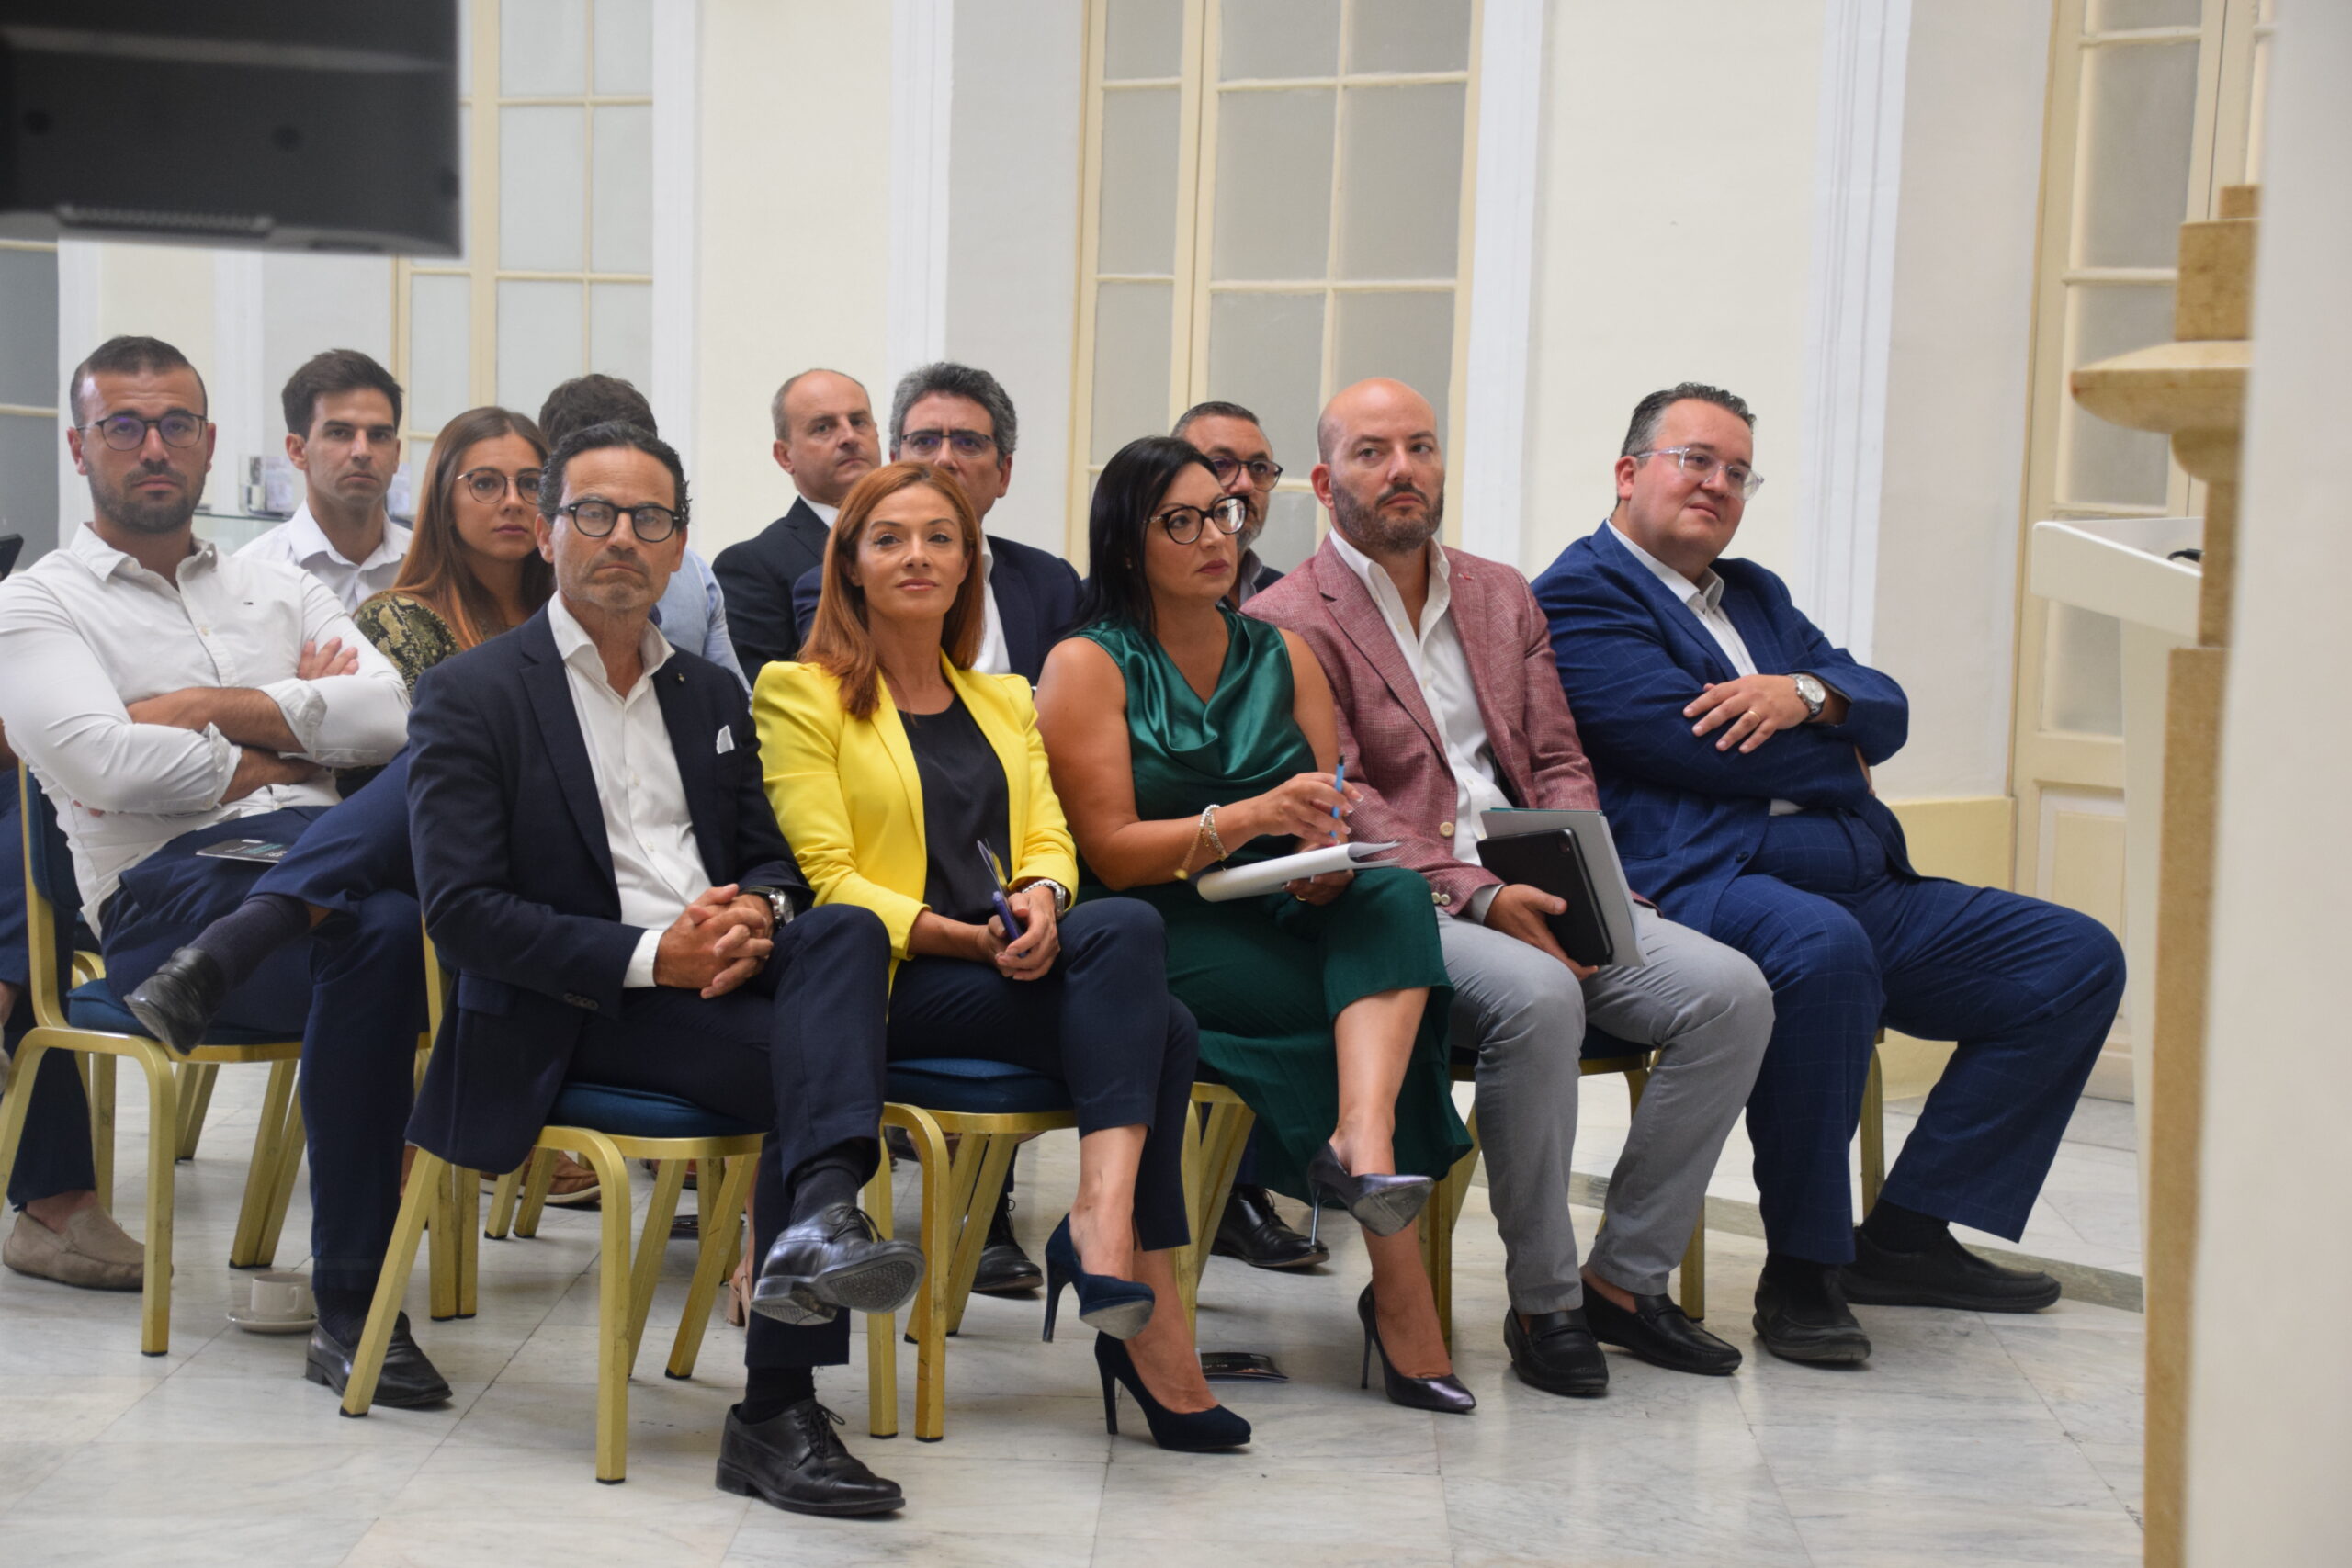 Leading a Family Business – Course launched by The Malta Chamber, EMCS Academy and the Family Business Office in Malta